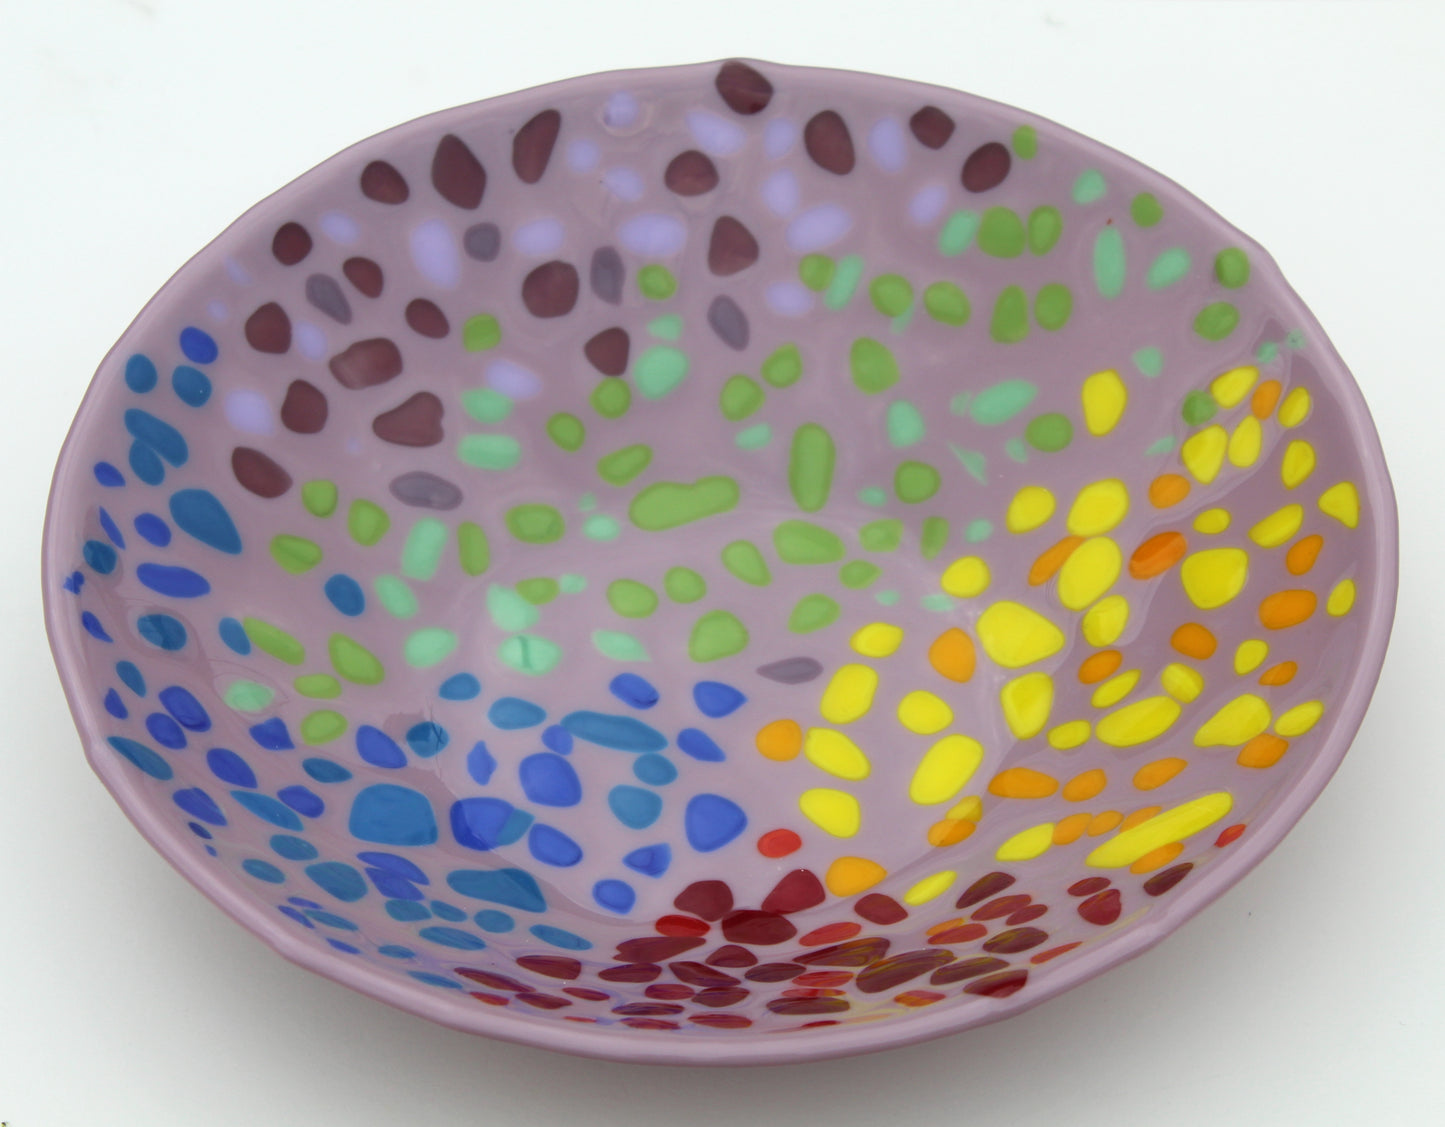 purple glass bowl with spots of red, yellow, green, and blue sectioned off